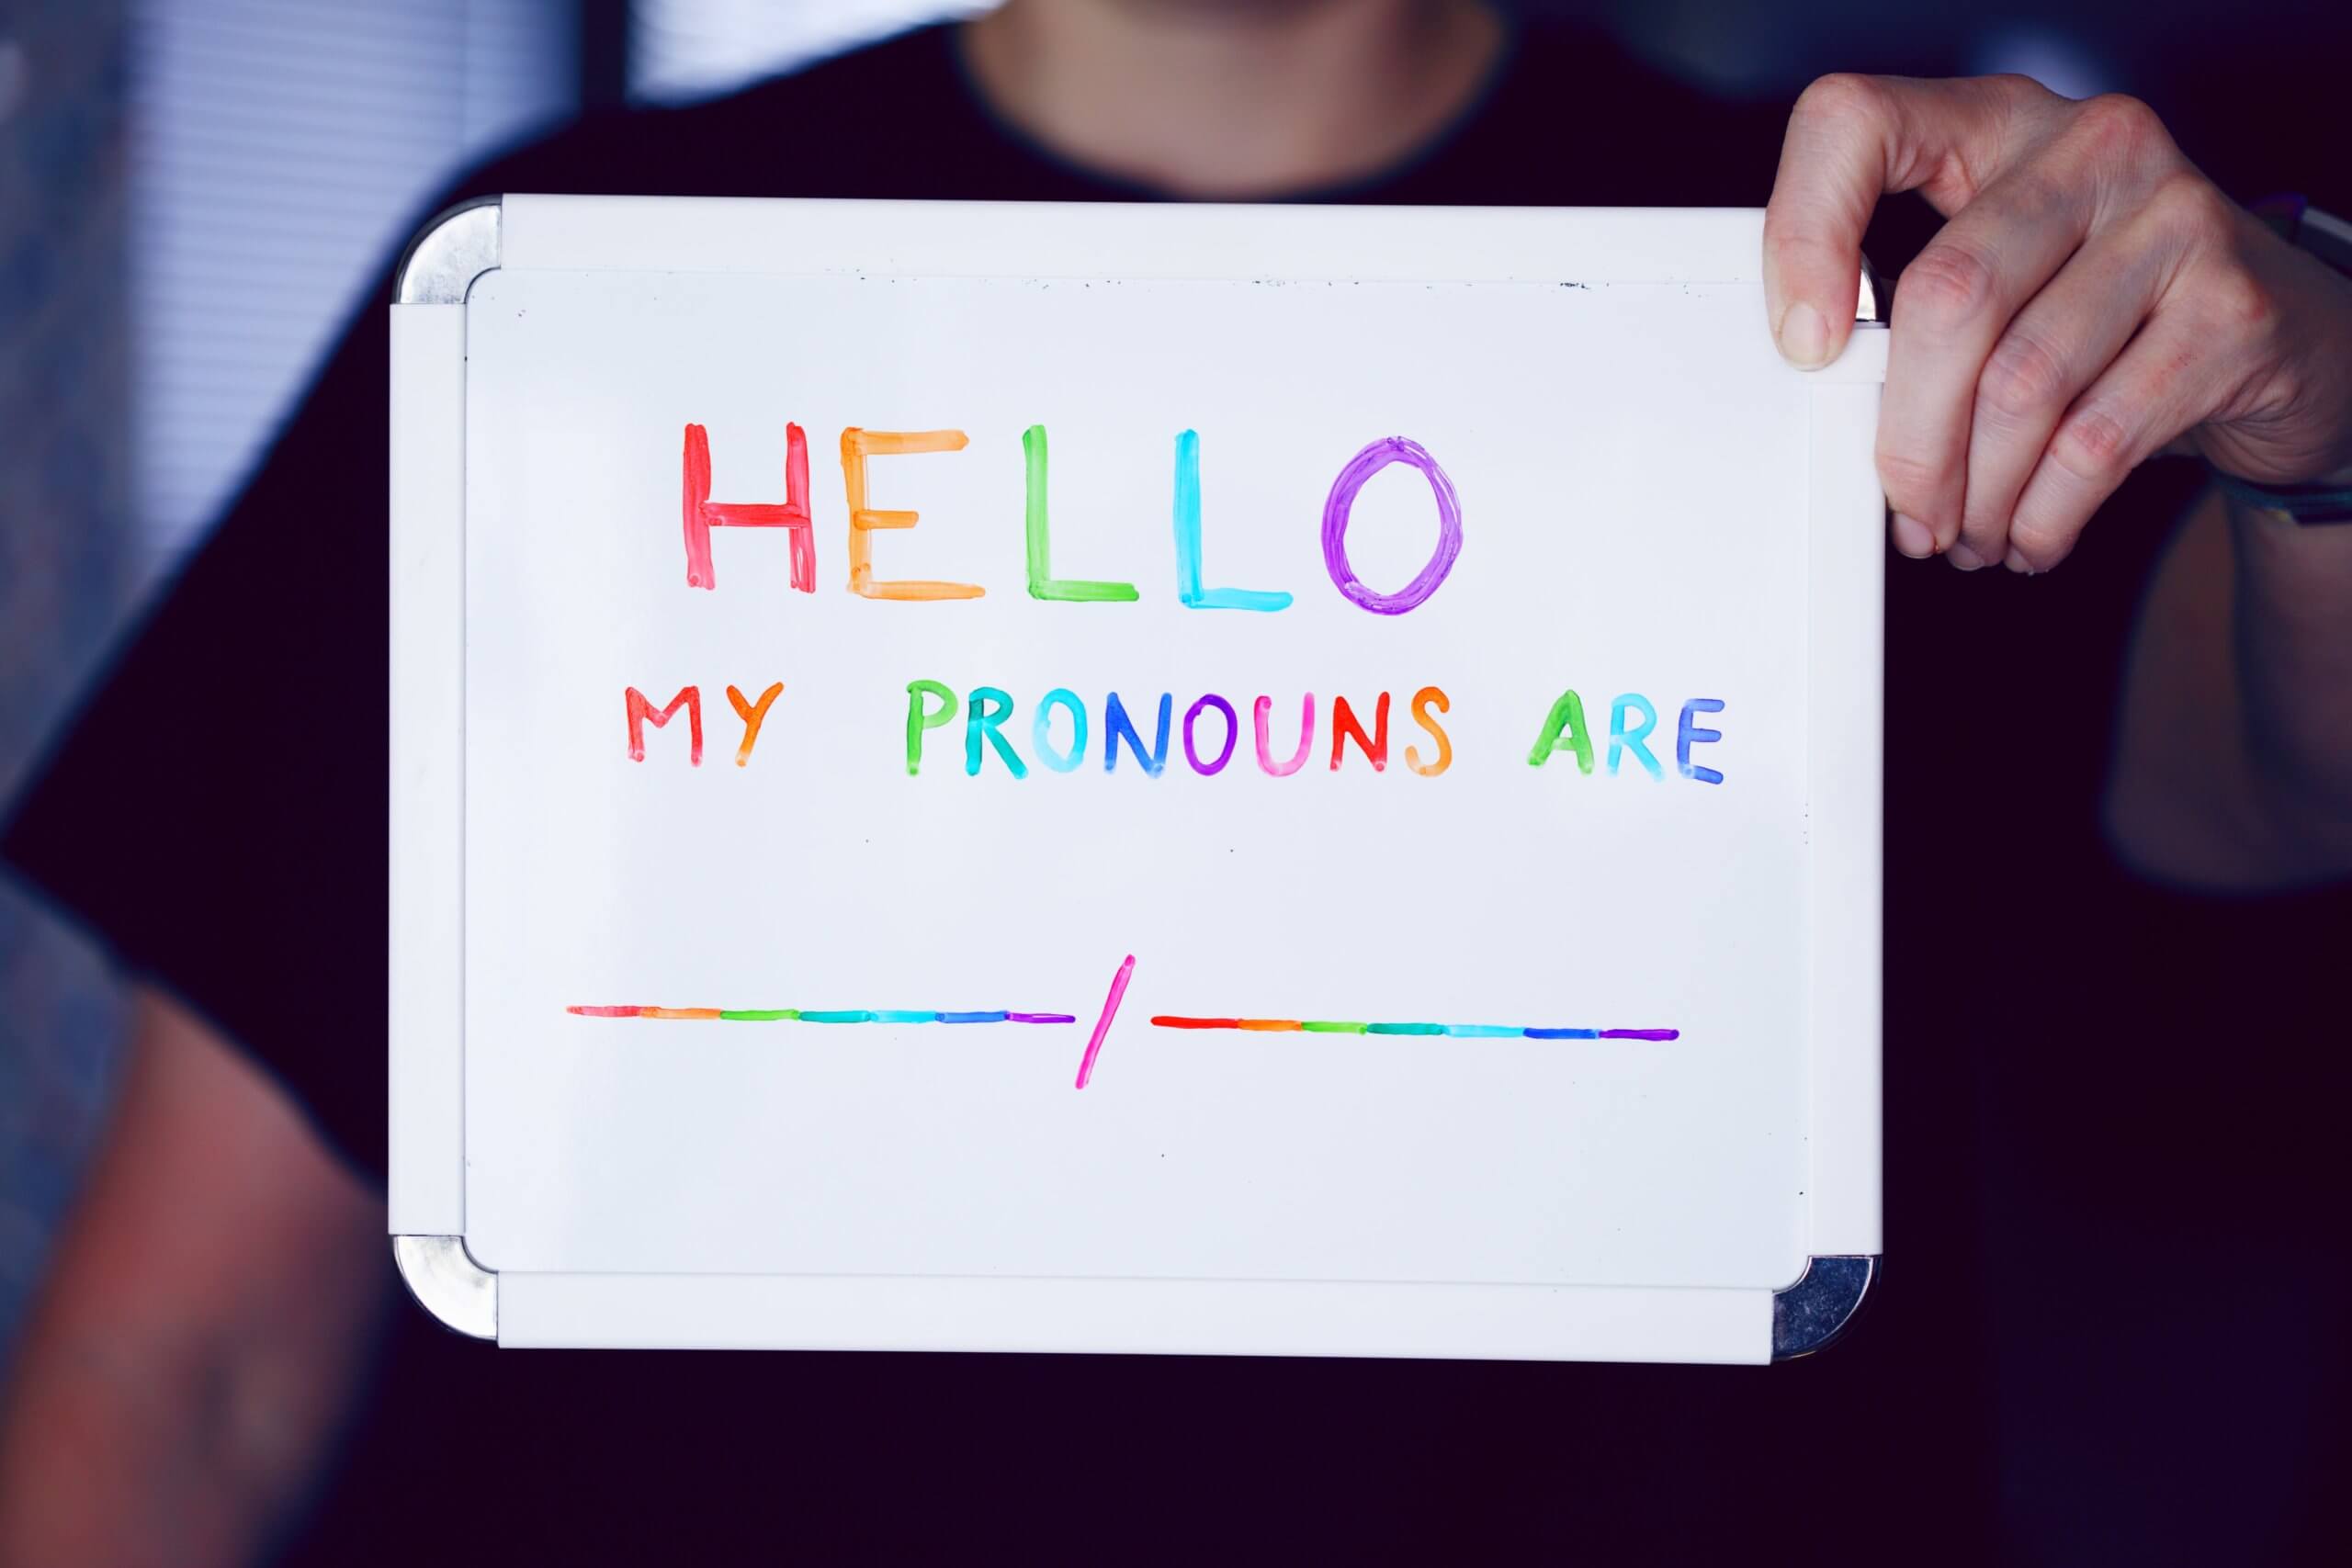 7 Tips for Discussing Gender Affirming Language with Your Family